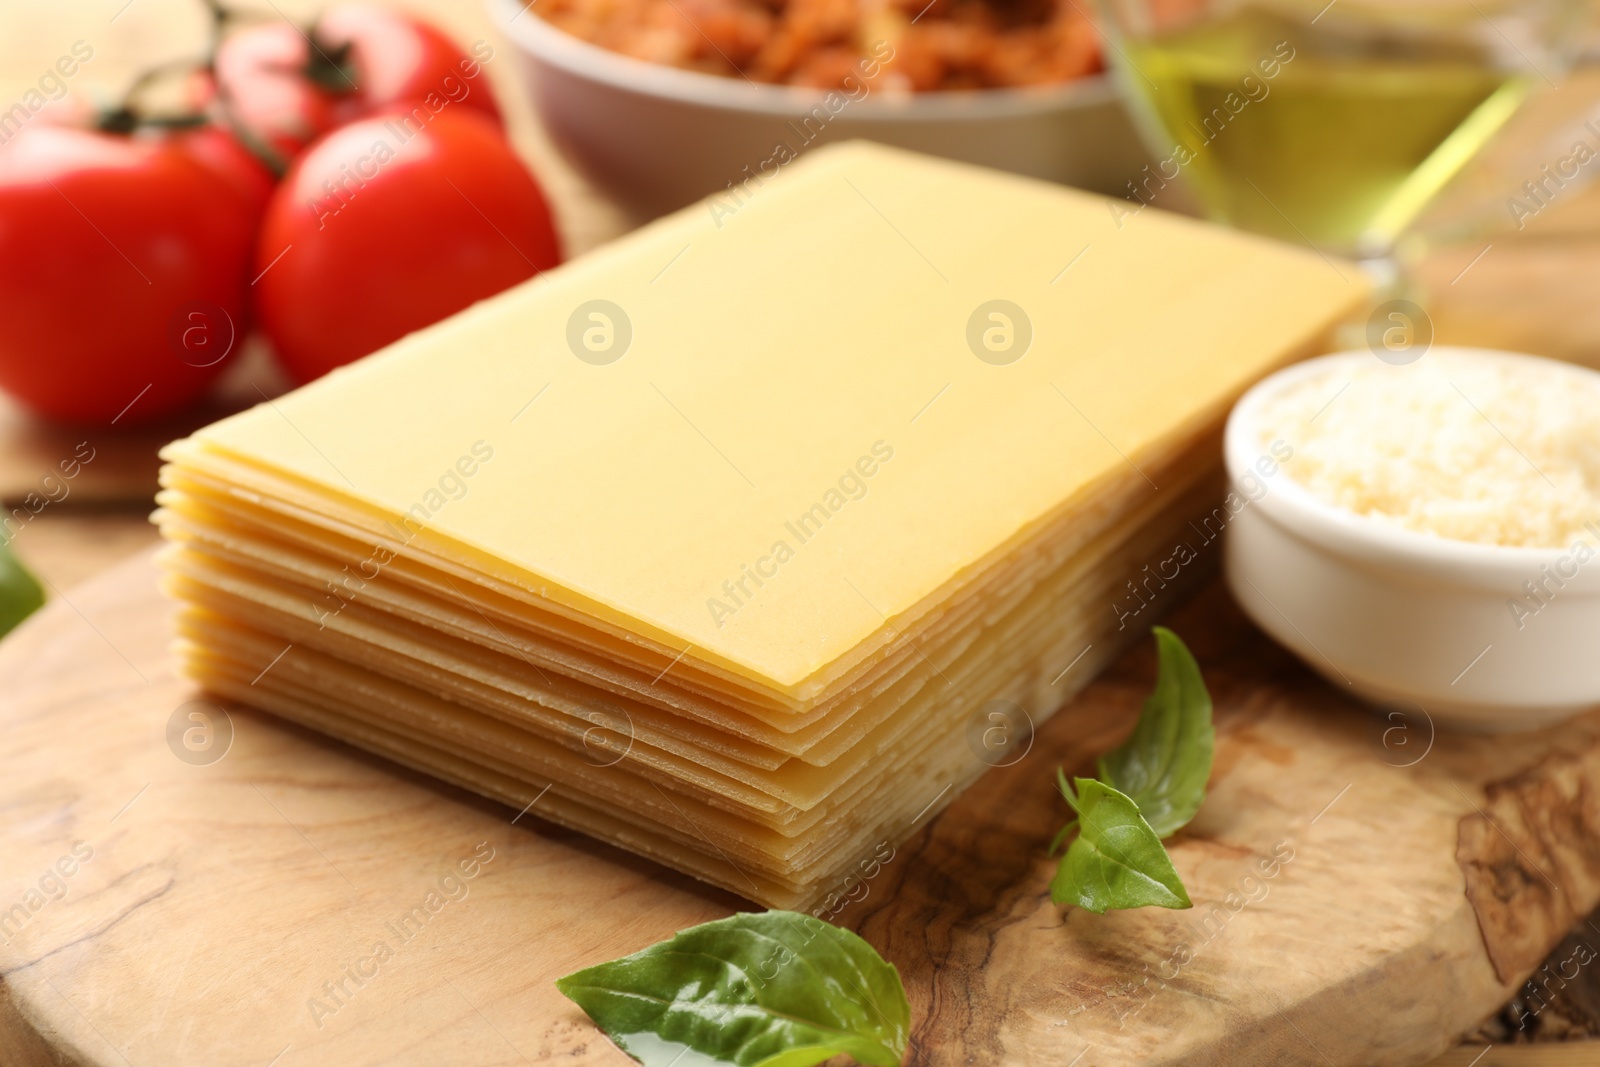 Photo of Cooking lasagna. Wooden board with pasta sheets and basil leaves on table, closeup